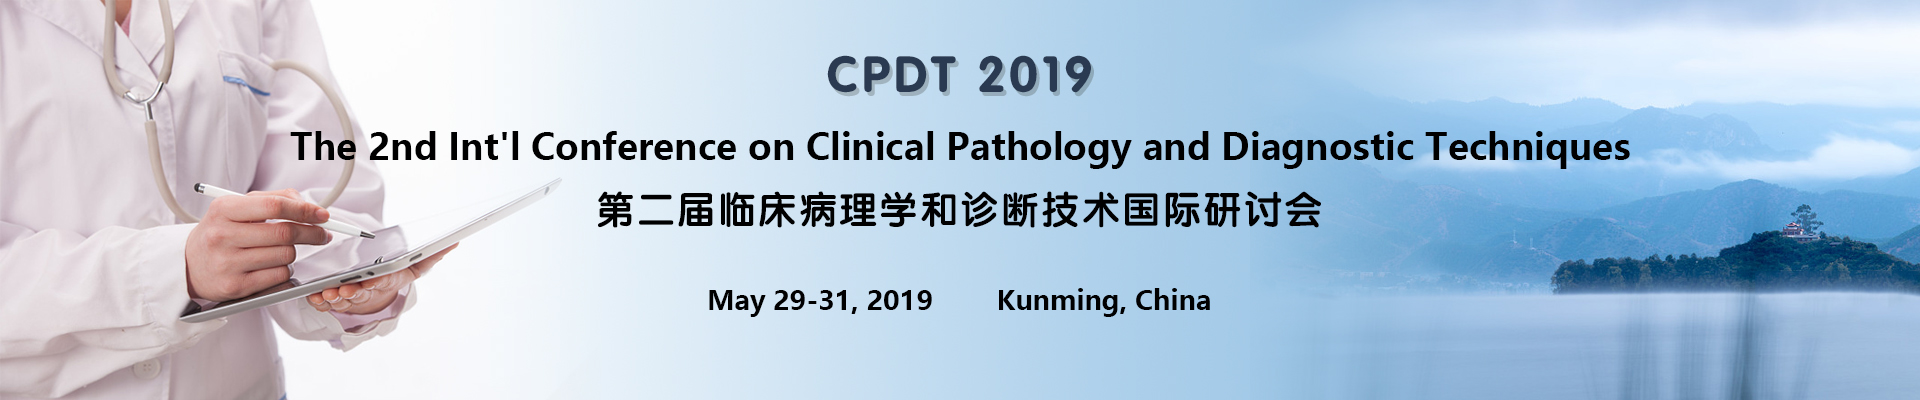 2nd Int. Conf. on Clinical Pathology and Diagnostic Techniques 